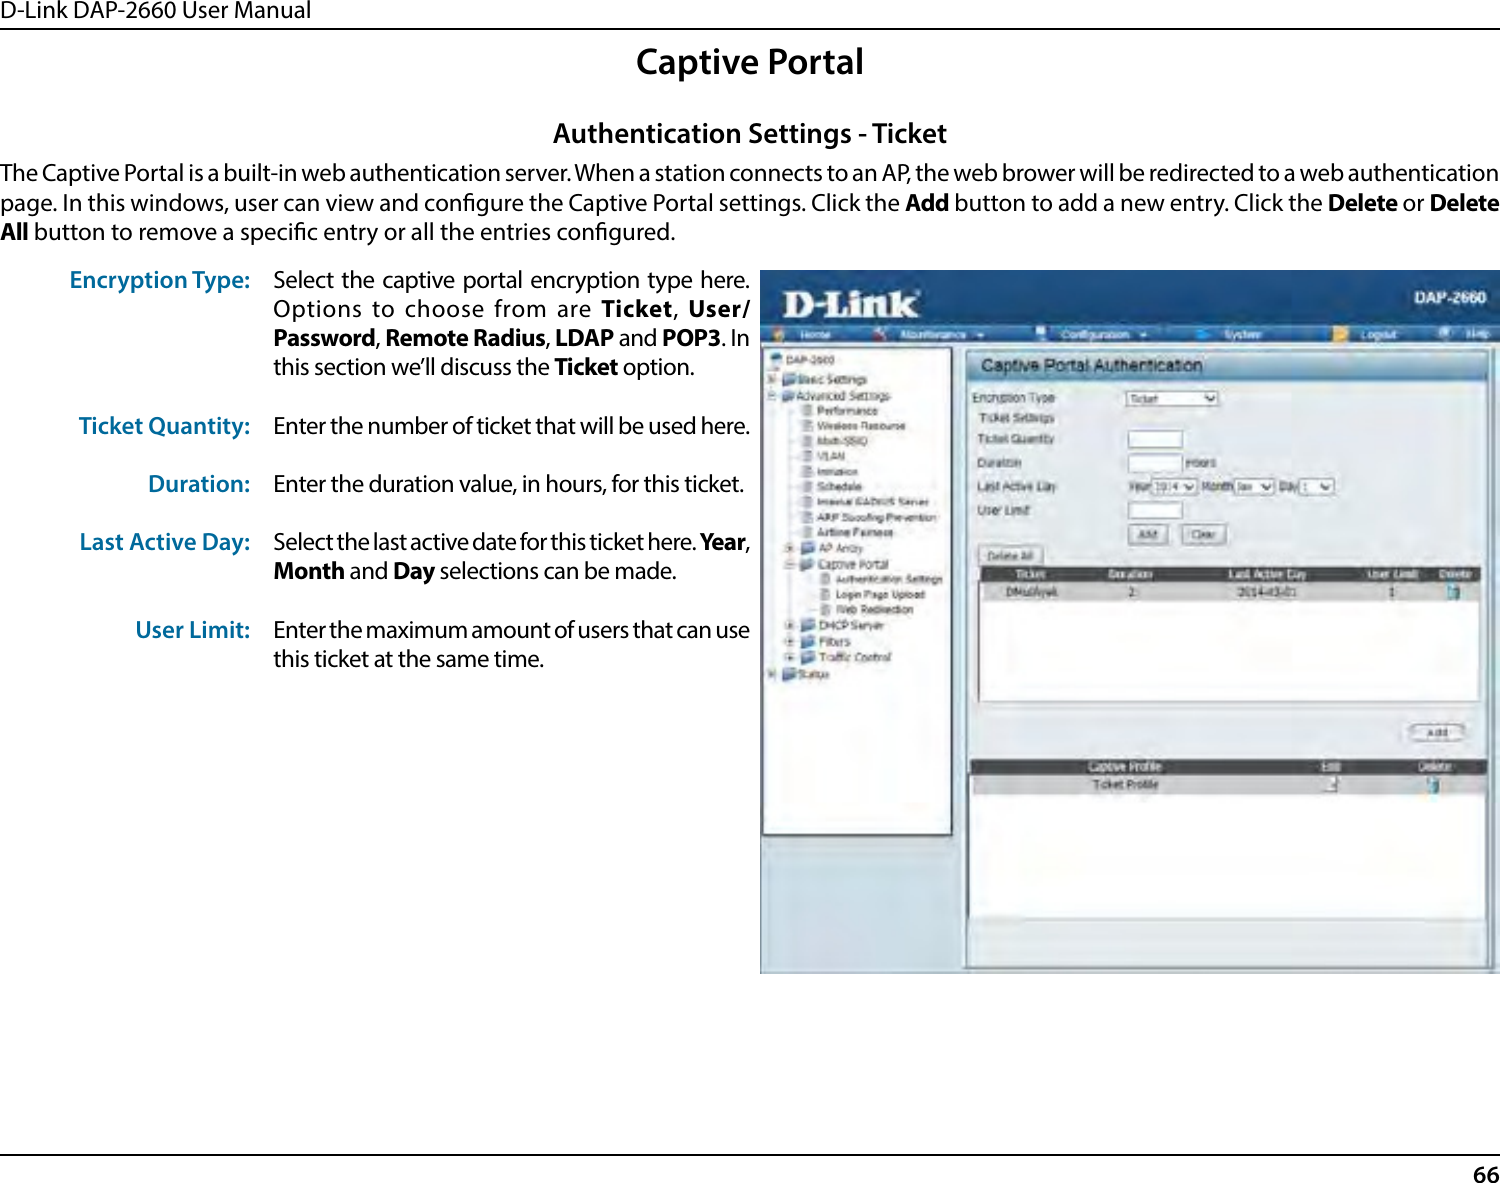 D-Link DAP-2660 User Manual66Captive PortalThe Captive Portal is a built-in web authentication server. When a station connects to an AP, the web brower will be redirected to a web authentication page. In this windows, user can view and congure the Captive Portal settings. Click the Add button to add a new entry. Click the Delete or Delete All button to remove a specic entry or all the entries congured.Encryption Type:Ticket Quantity:Duration:Last Active Day:User Limit:Select the captive portal encryption type here. Options to choose from are Ticket, User/Password, Remote Radius, LDAP and POP3. In this section we’ll discuss the Ticket option.Enter the number of ticket that will be used here.Enter the duration value, in hours, for this ticket.Select the last active date for this ticket here. Year, Month and Day selections can be made.Enter the maximum amount of users that can use this ticket at the same time.Authentication Settings - Ticket